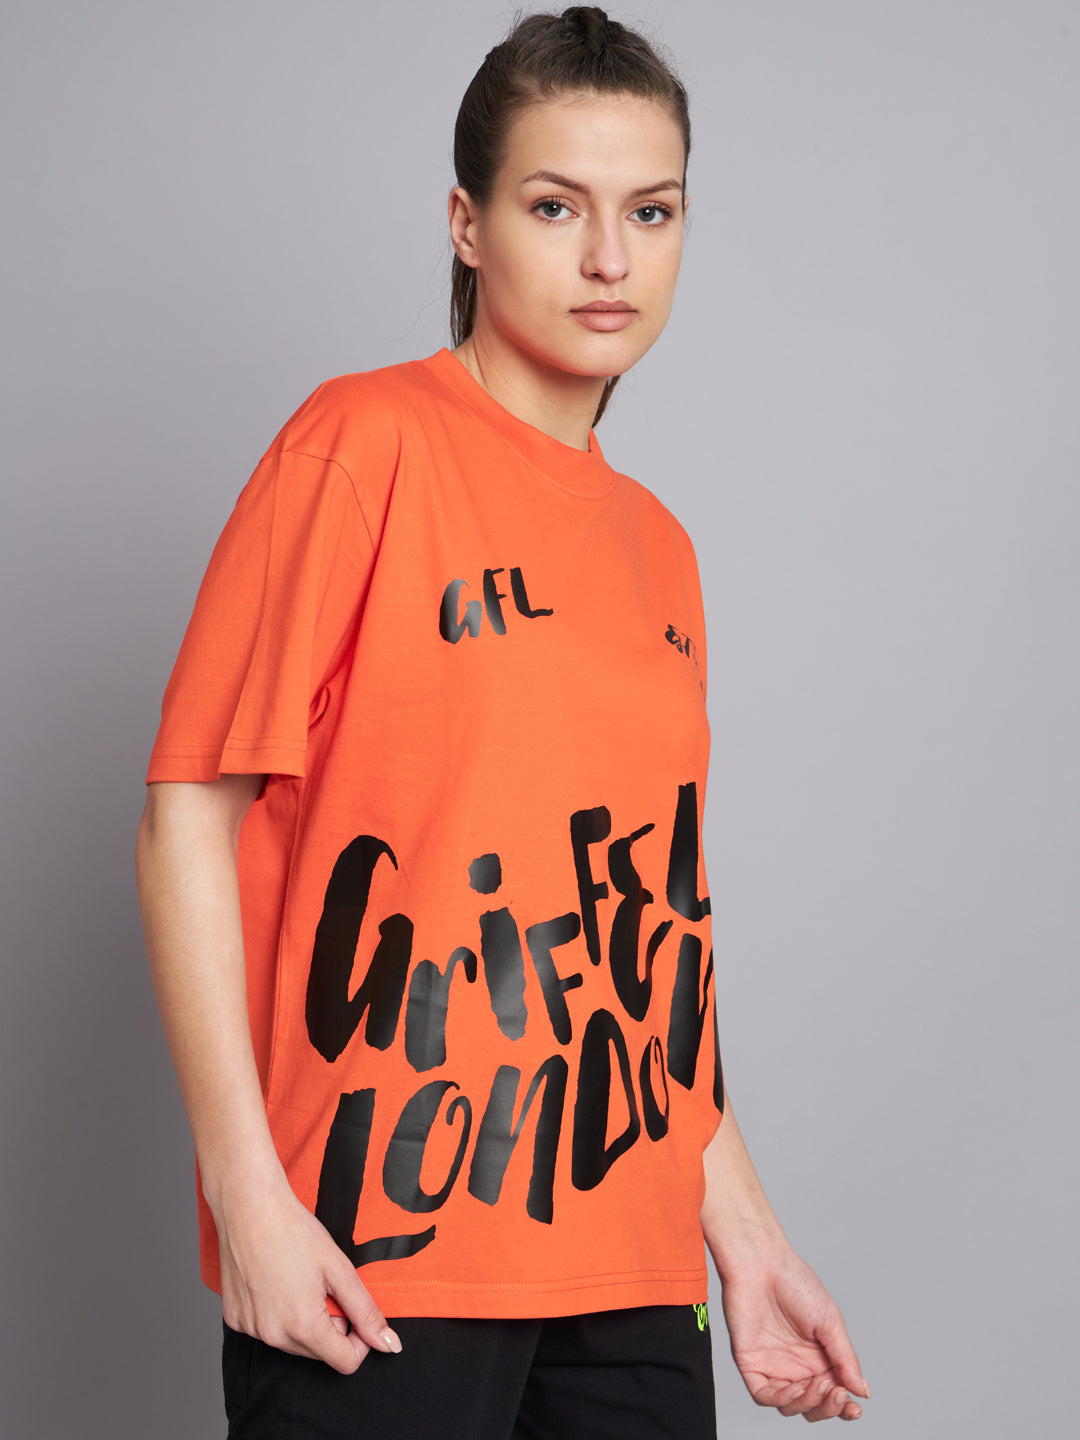 GRIFFEL Women Neon Orange Printed Oversized Loose fit T-shirt and Trackpant Set - griffel